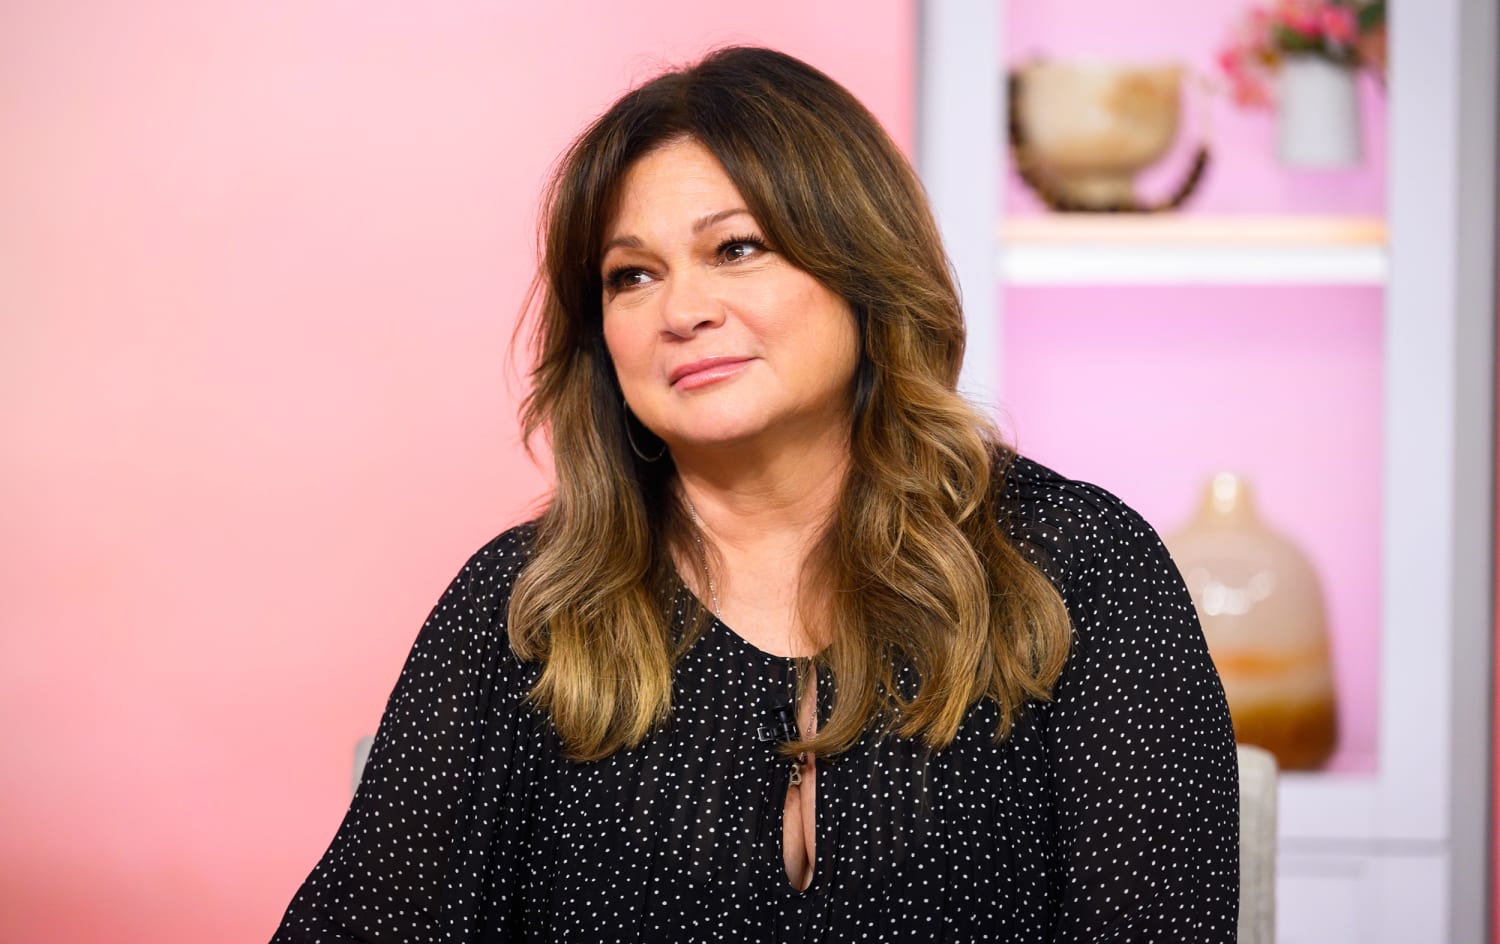 Valerie Bertinelli calls out Food Network following exit: 'It's not about cooking and learning any longer'